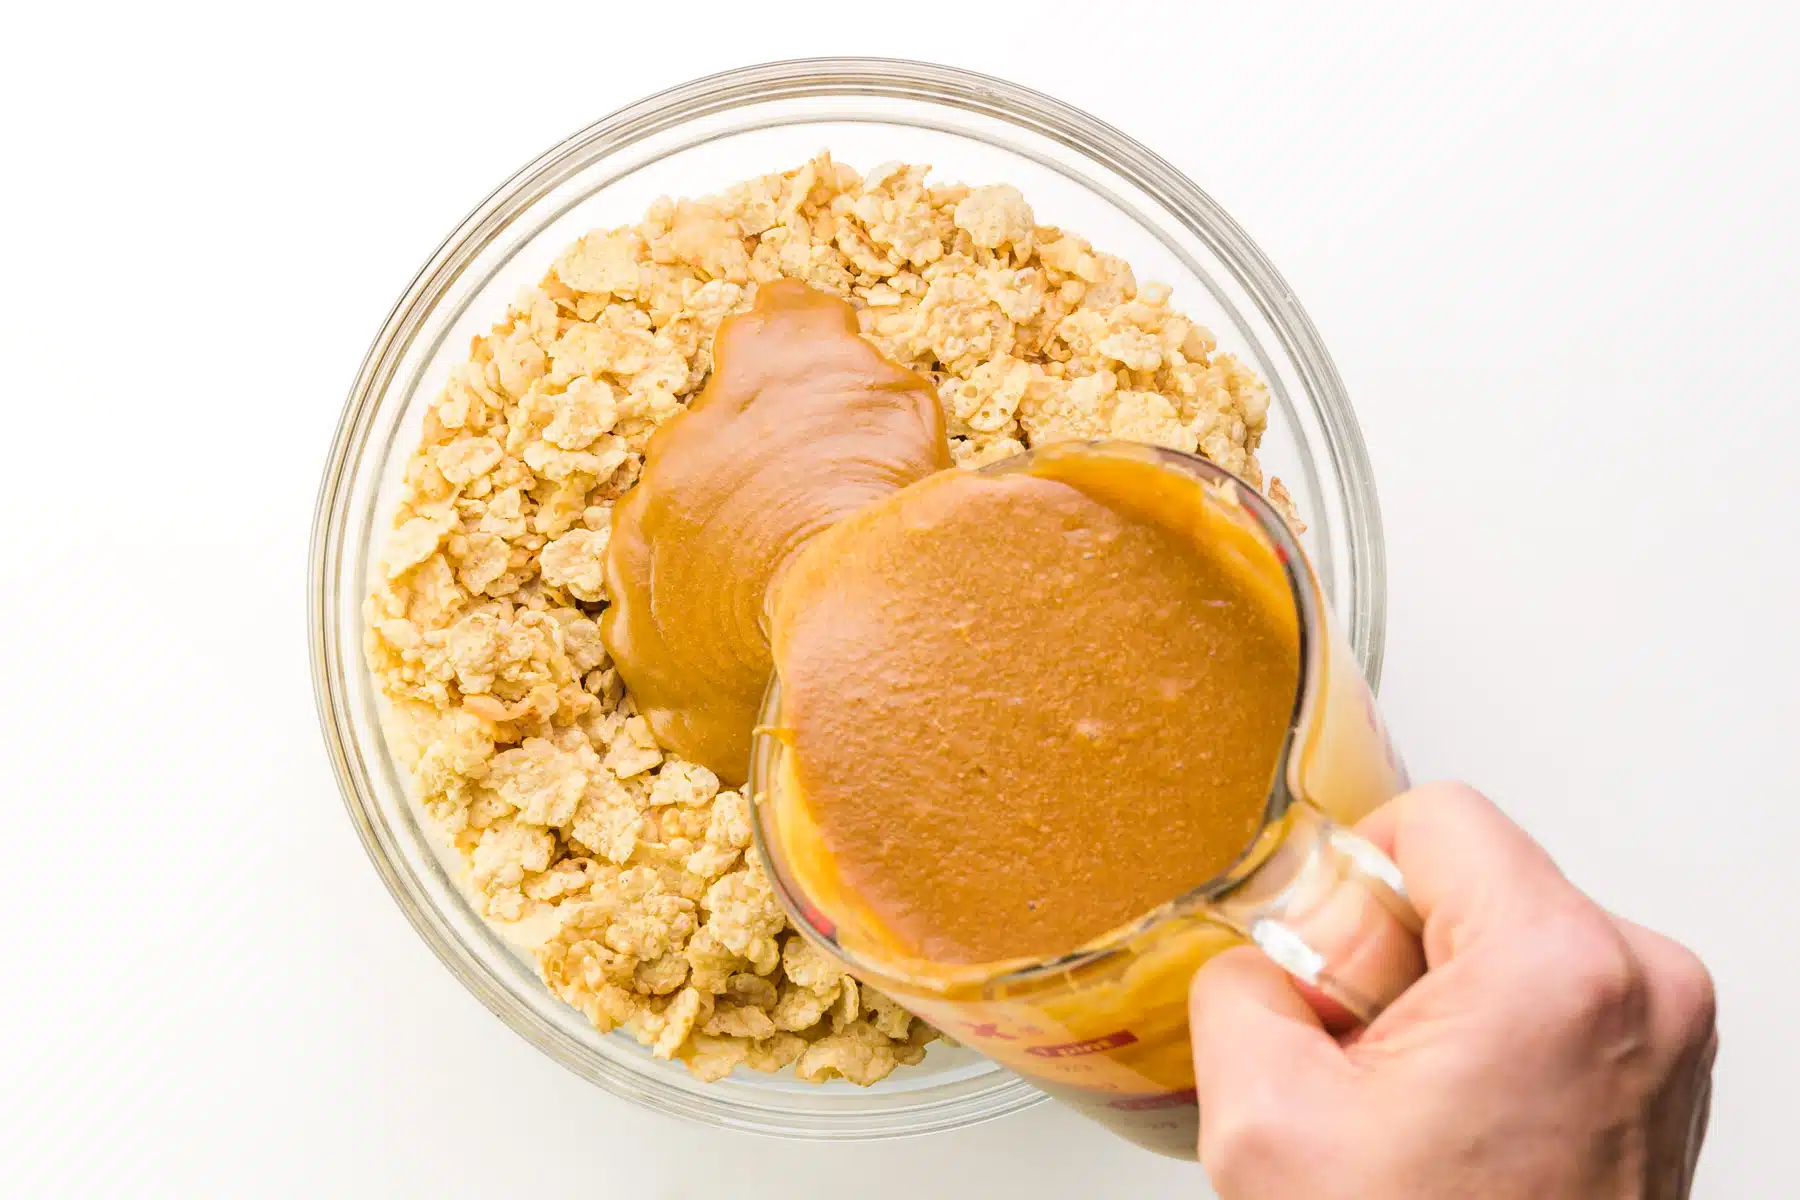 A hand holds a cup of melted peanut butter, pouring it over a bowl of cereal.